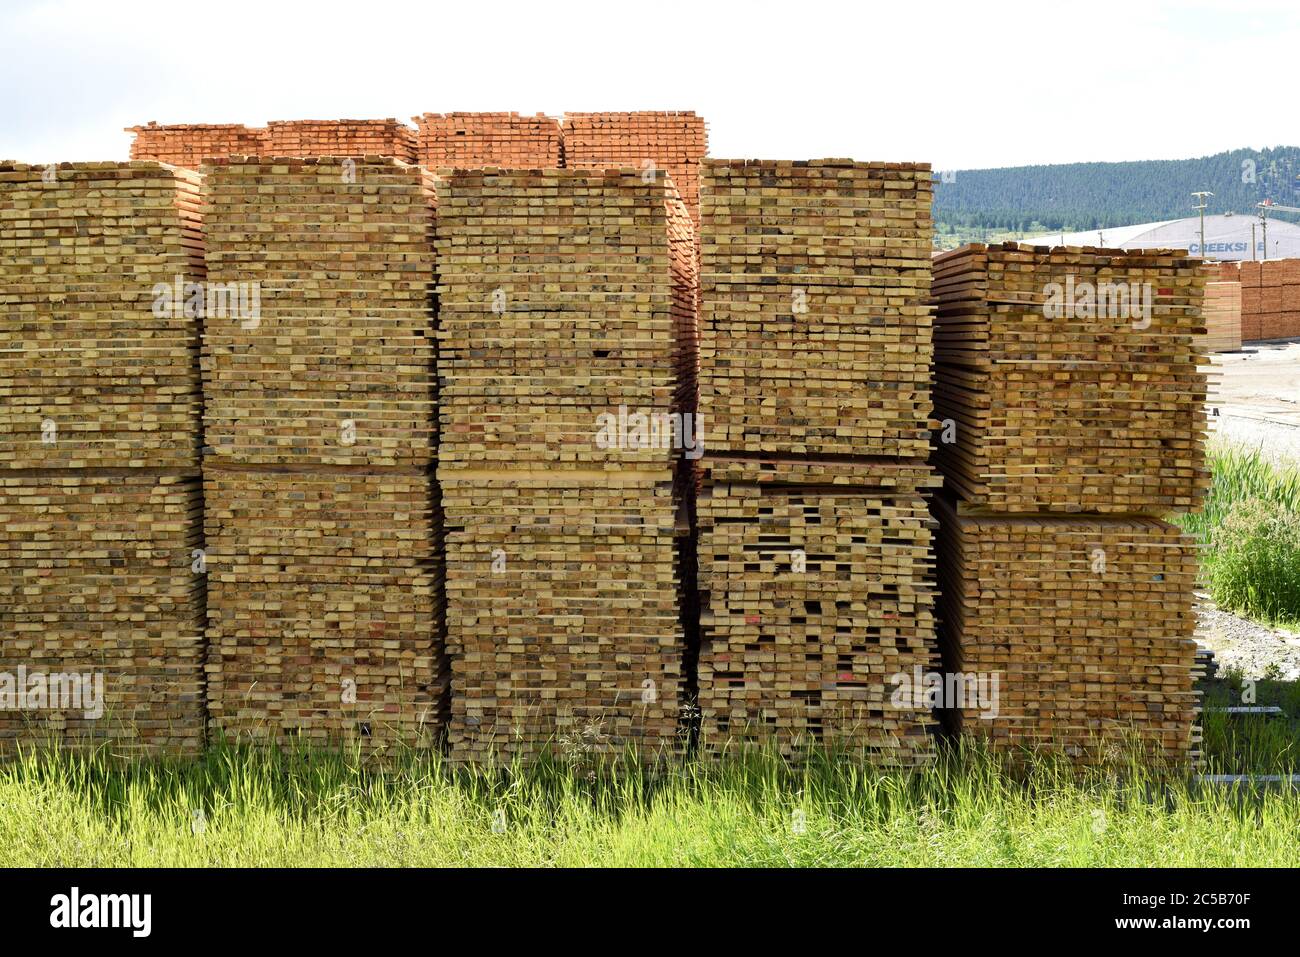 Piles of lumber boards sit stacked in the yard at Tolko Industries’ Lakeview division in Williams Lake, British Columbia, Canada. Stock Photo